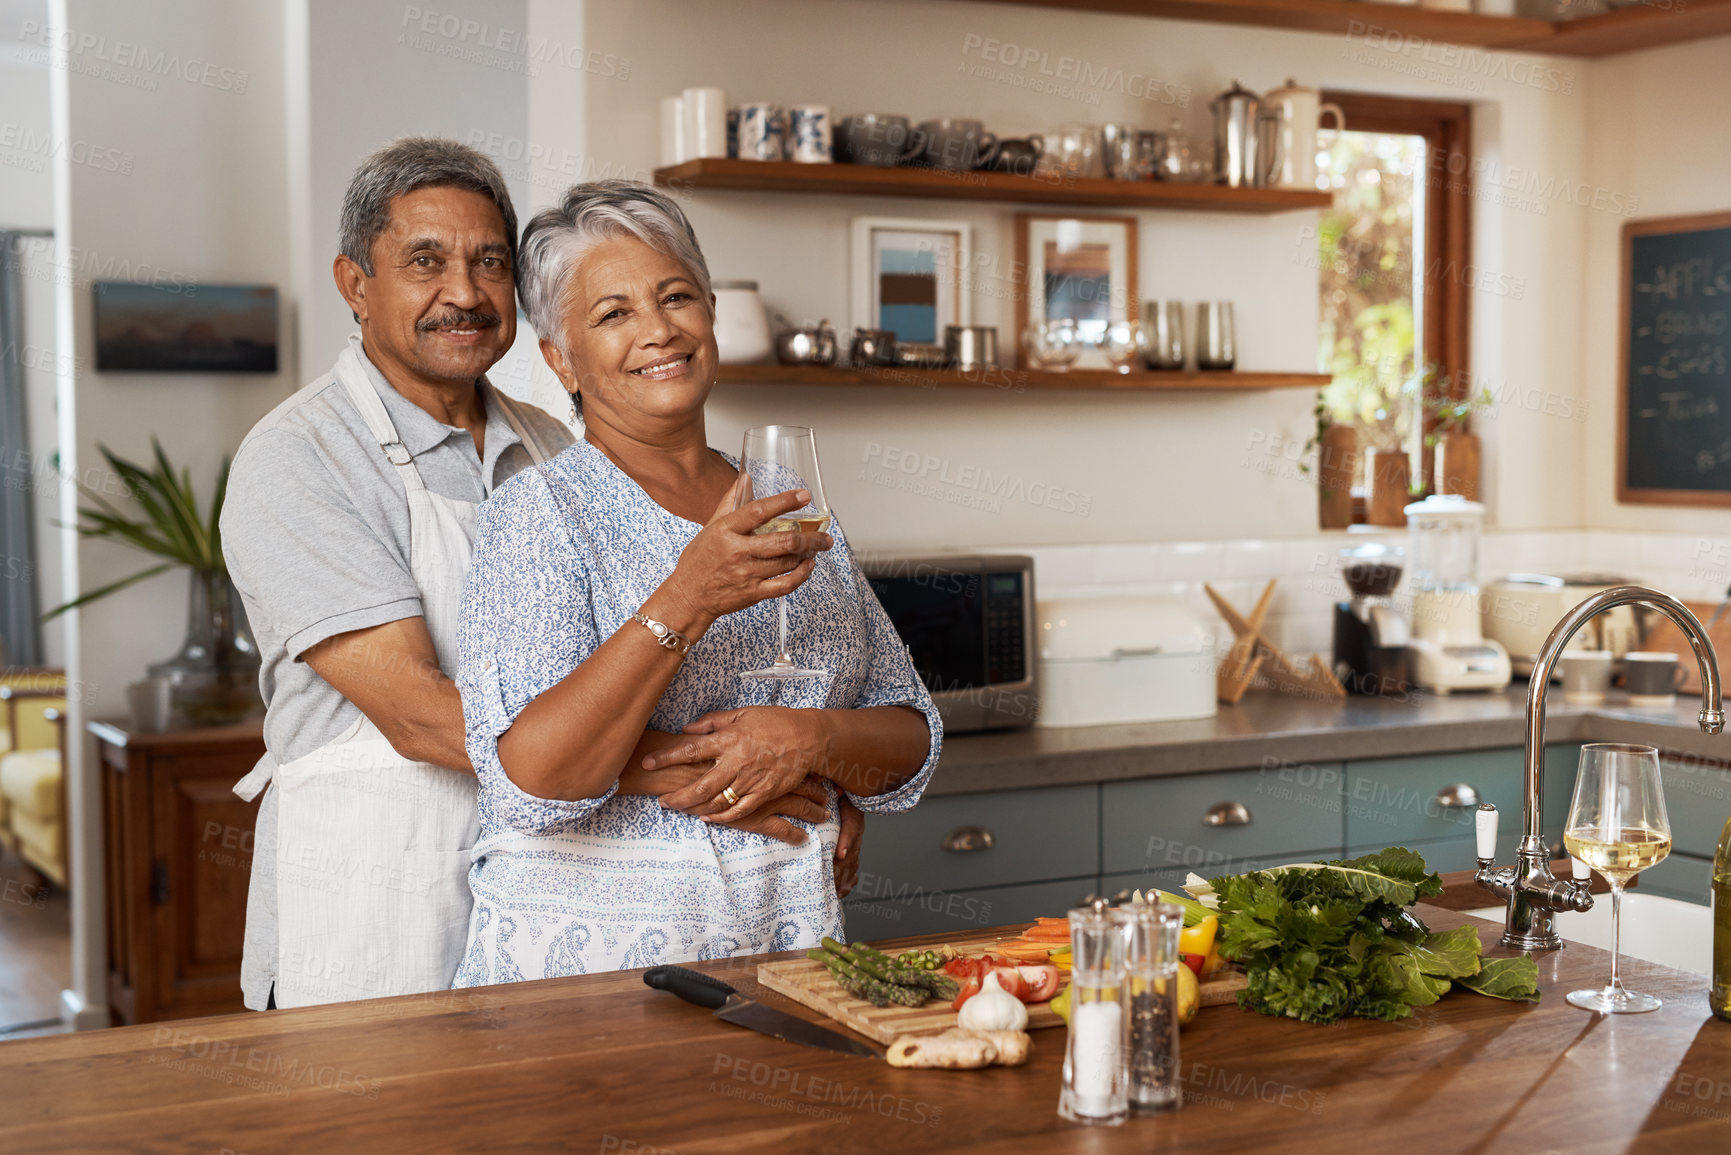 Buy stock photo Portrait of old couple at kitchen counter with wine, embrace and cooking healthy vegetable dinner together. Smile, happiness and food, senior man and happy woman with drink, vegetables and retirement